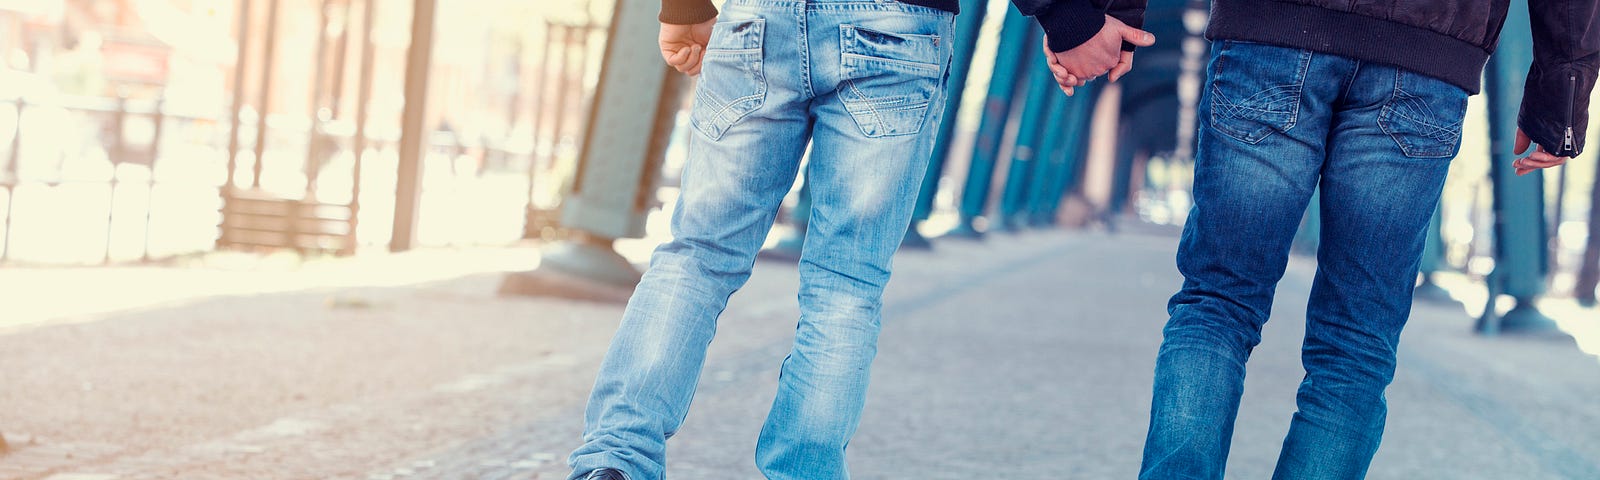 Two men in jeans, holding hands and walking. Photo from back